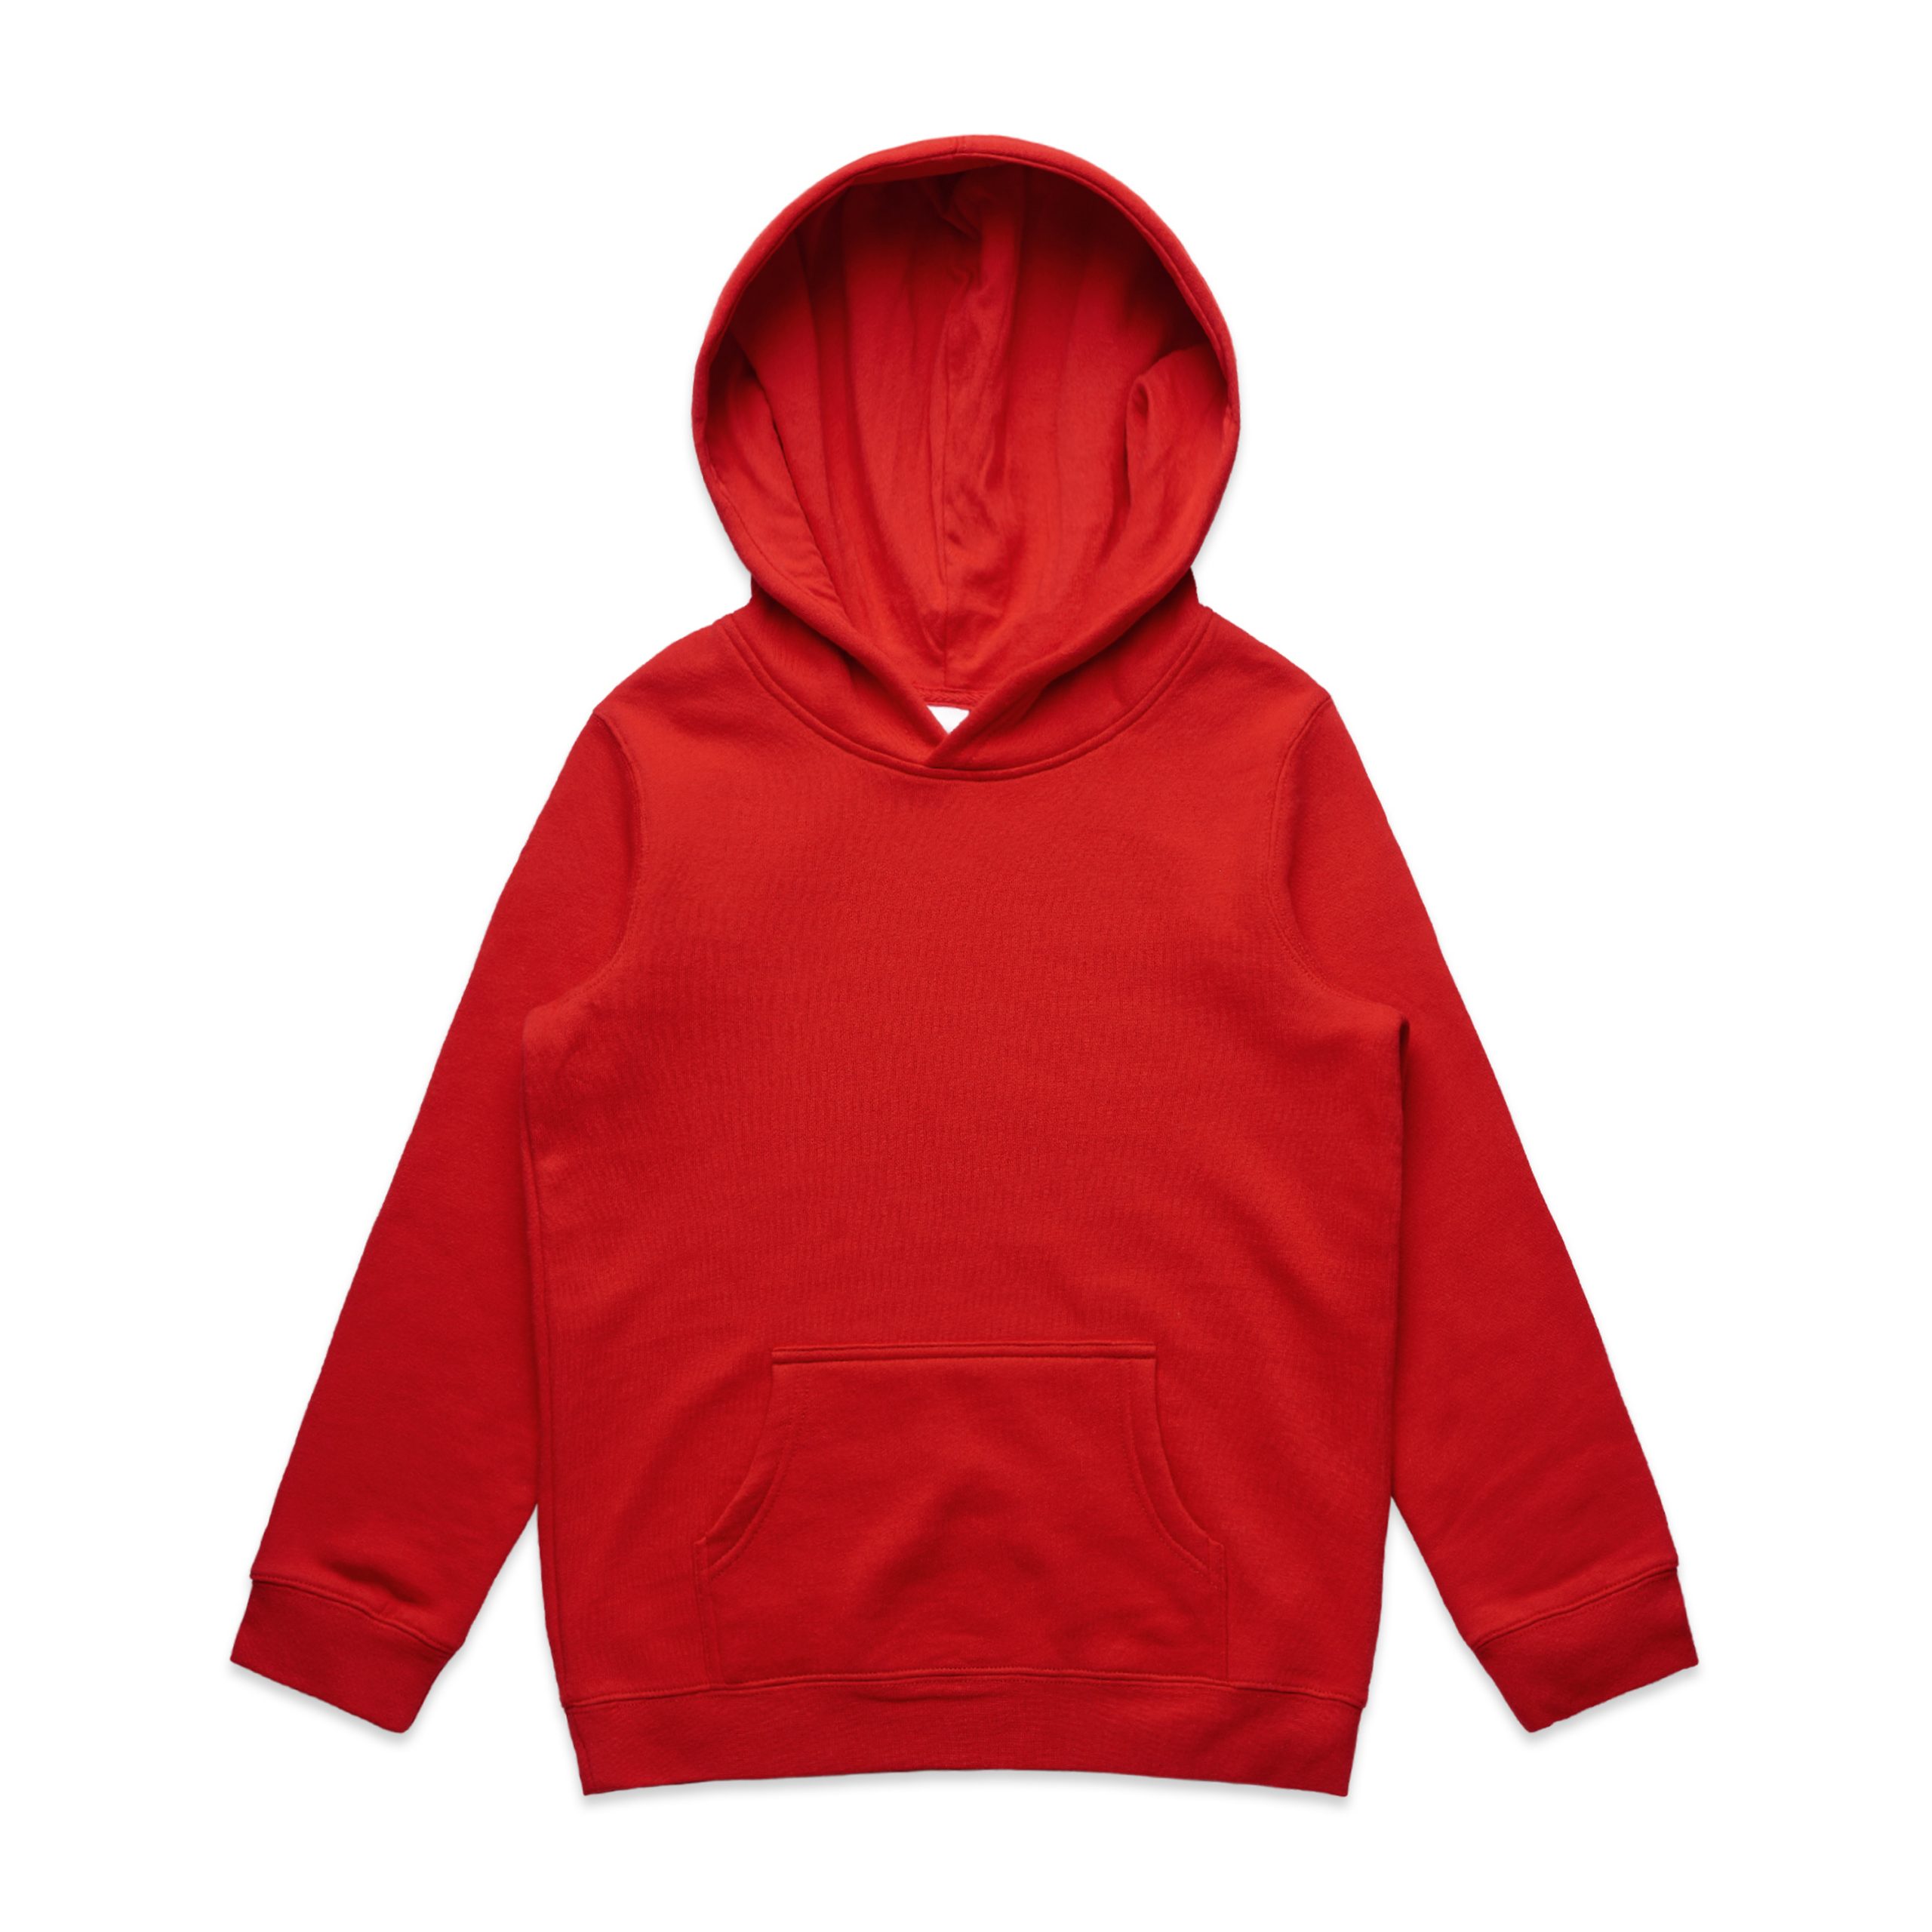 3033_AS_Youth-Supply-Hood_Red-scaled